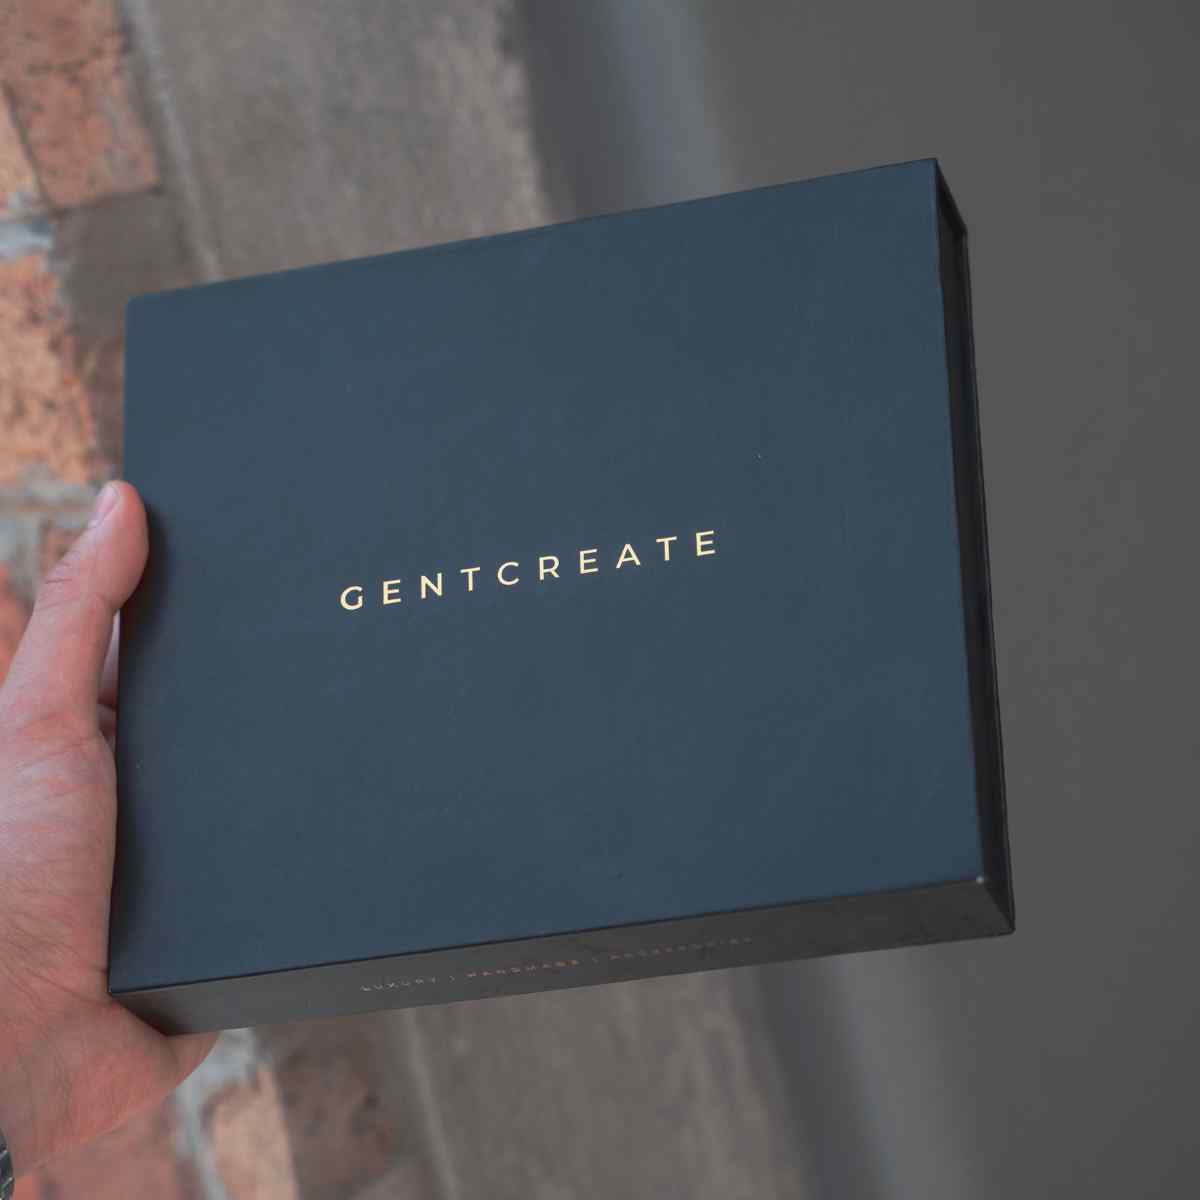 A man is holding a box from Gentcreate with luxury leather products inside